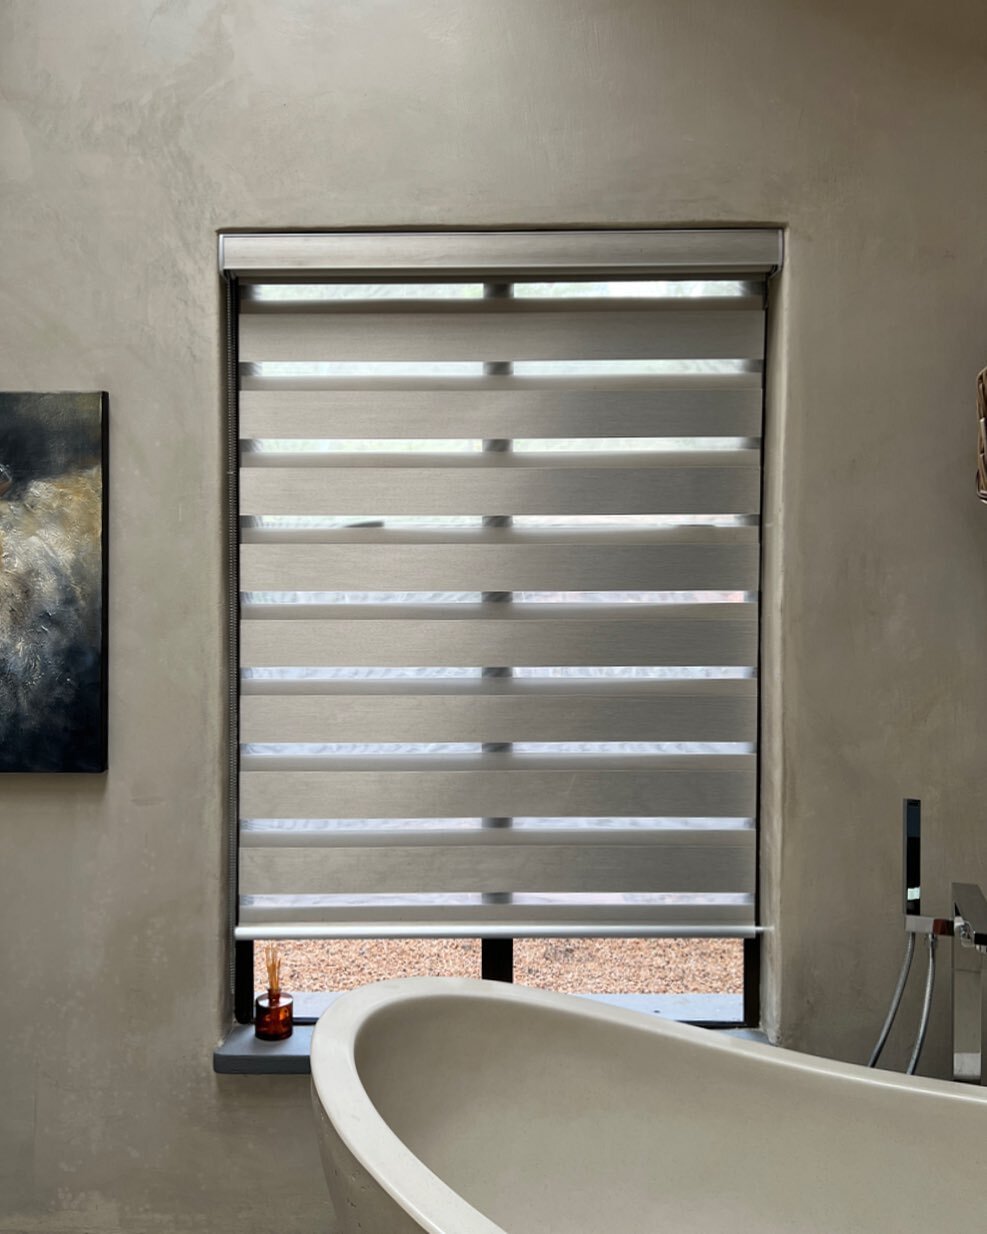 Vision Blinds offer an ideal balance between privacy and light control in a fashionable manner.

A Vision Blind features two layers of translucent and opaque horizontal striped fabric. A single control allows the front layer to move independently of 